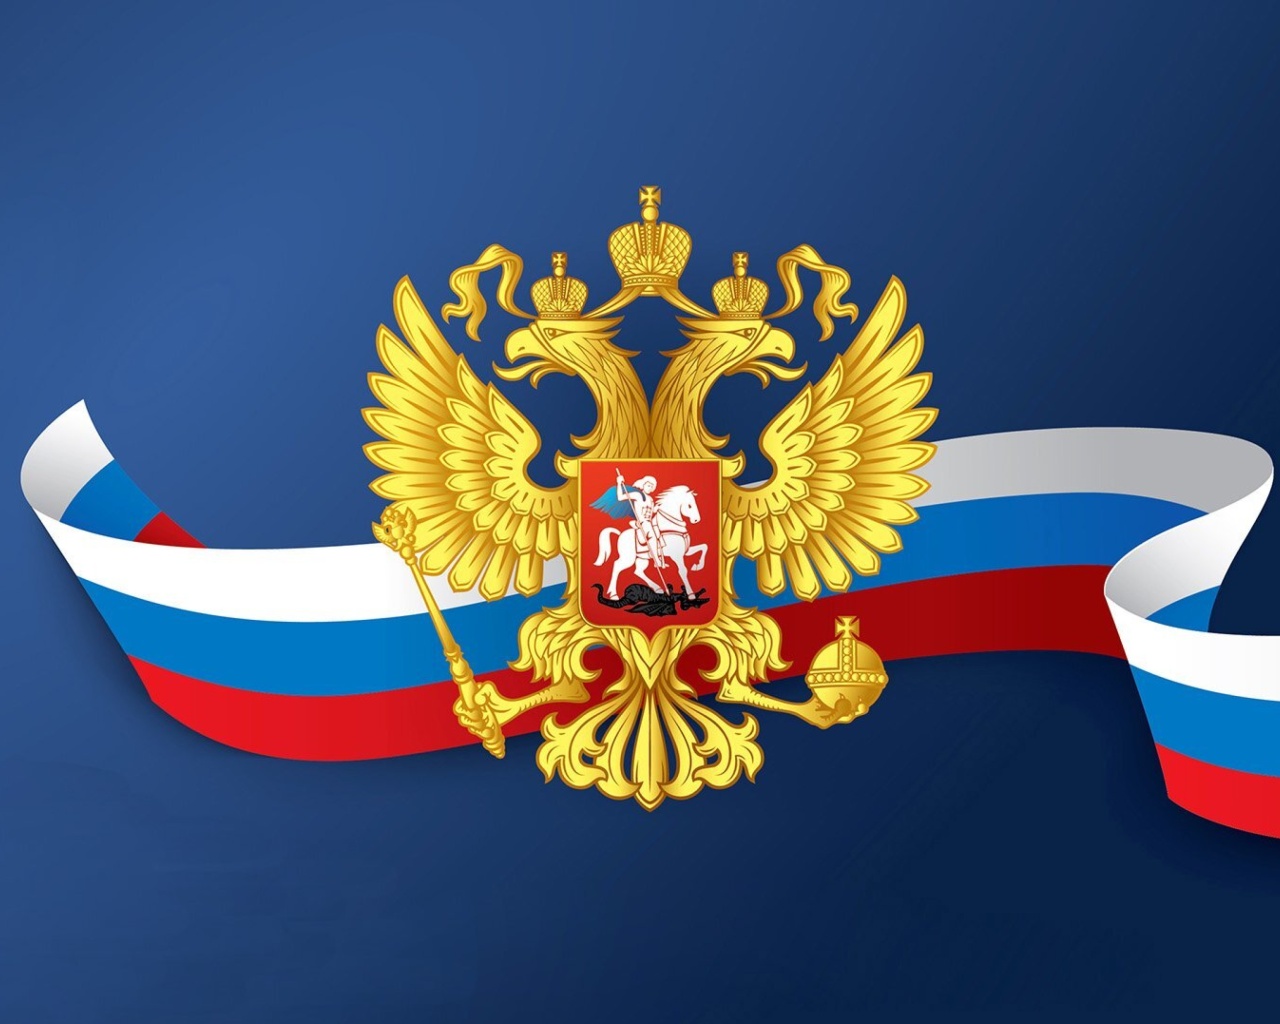 Das Russian coat of arms and flag Wallpaper 1280x1024